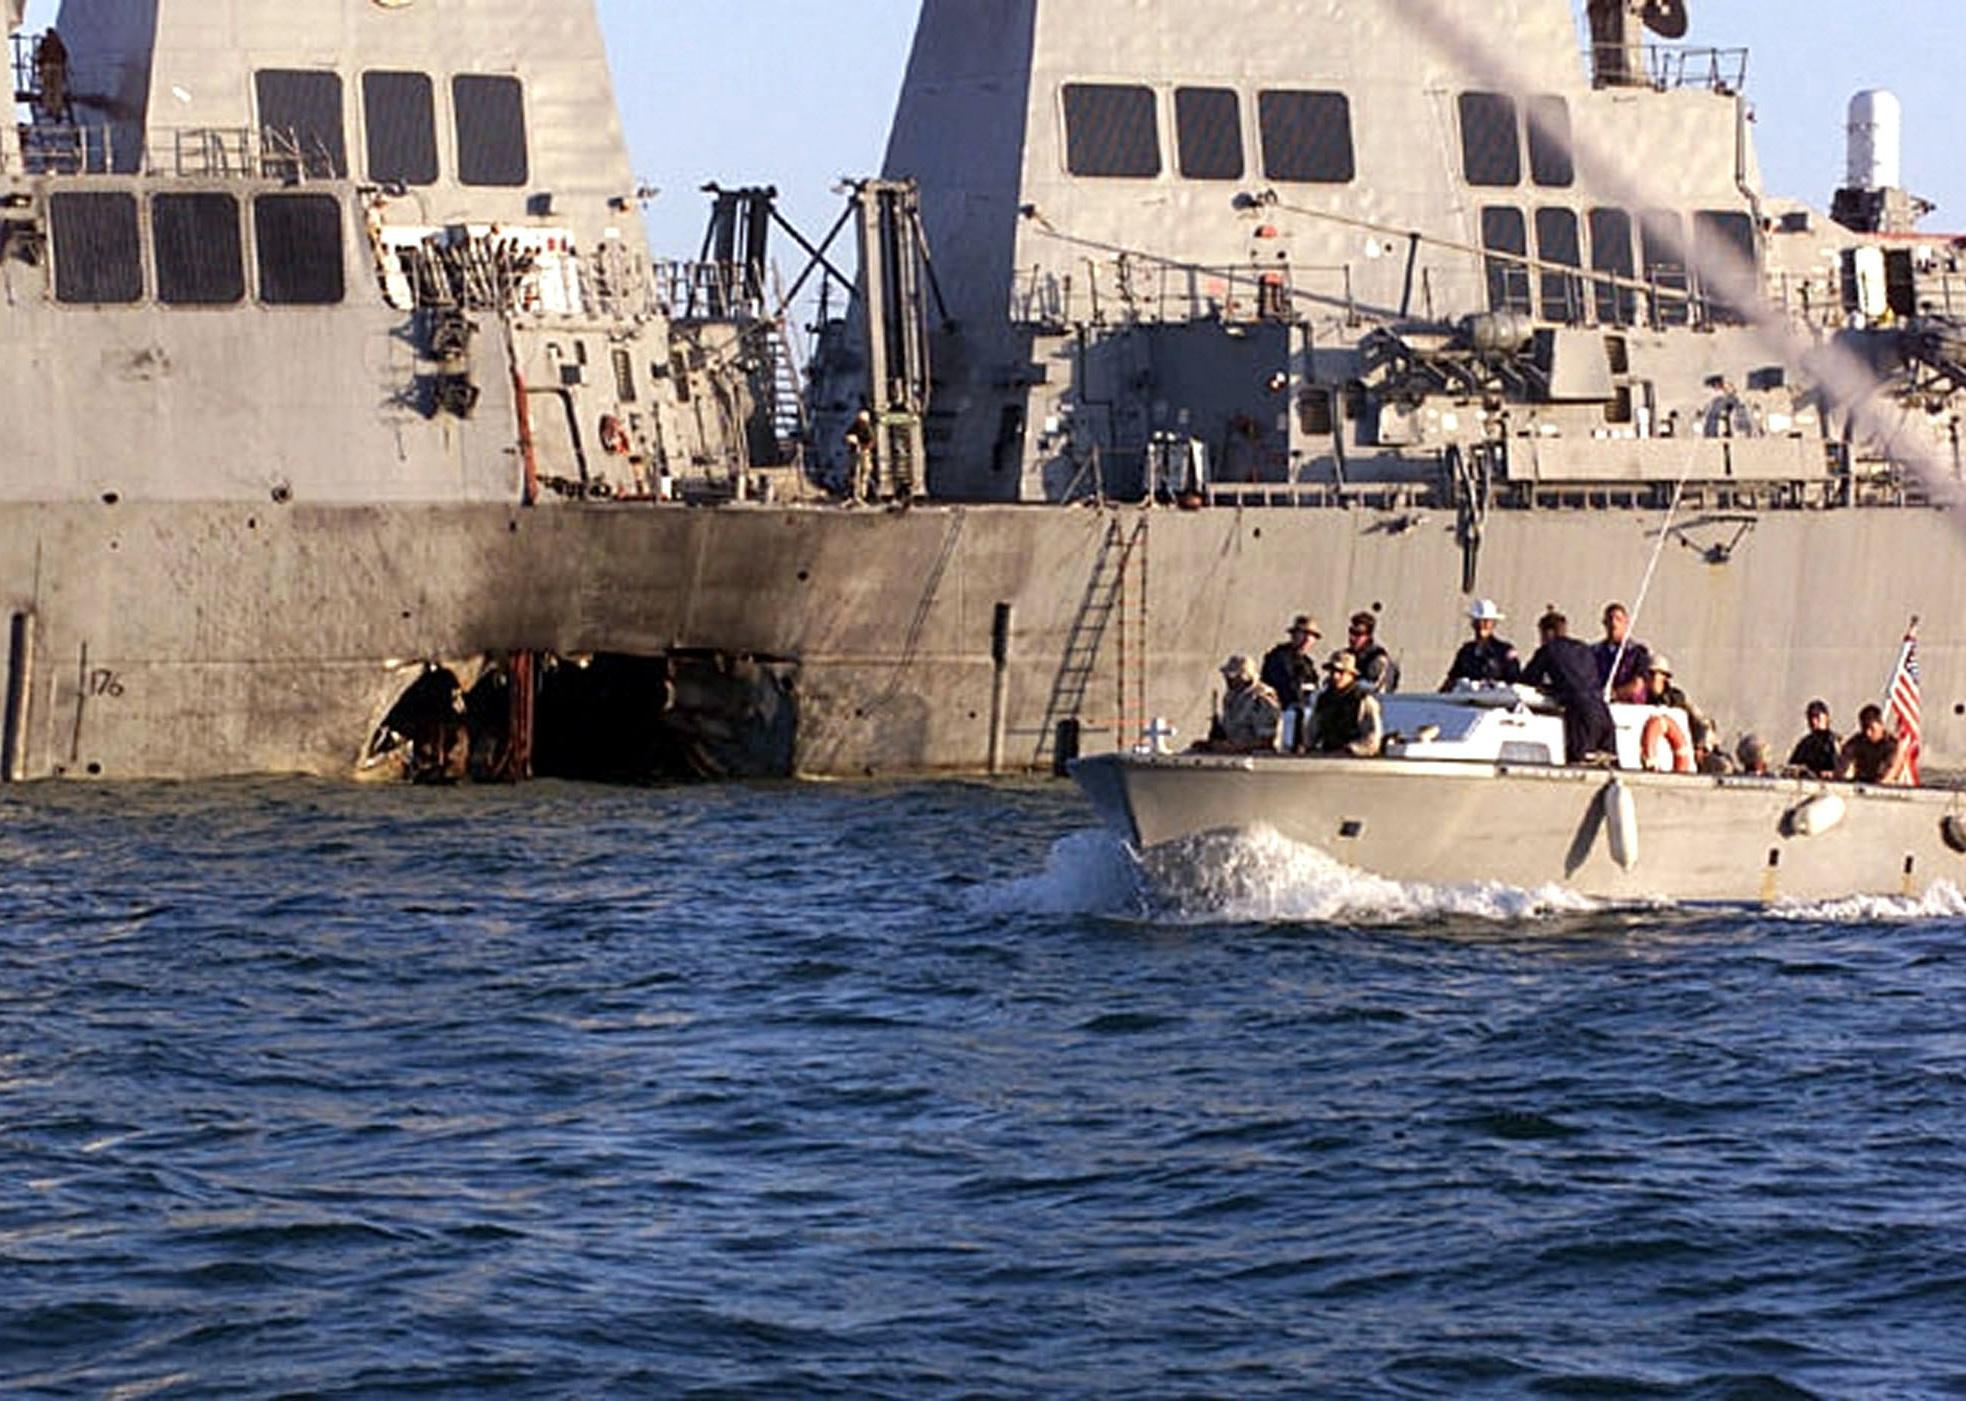 U.S. Navy and Marine Corps security personnel patrol past the damaged U.S. Navy destroyer USS Cole.